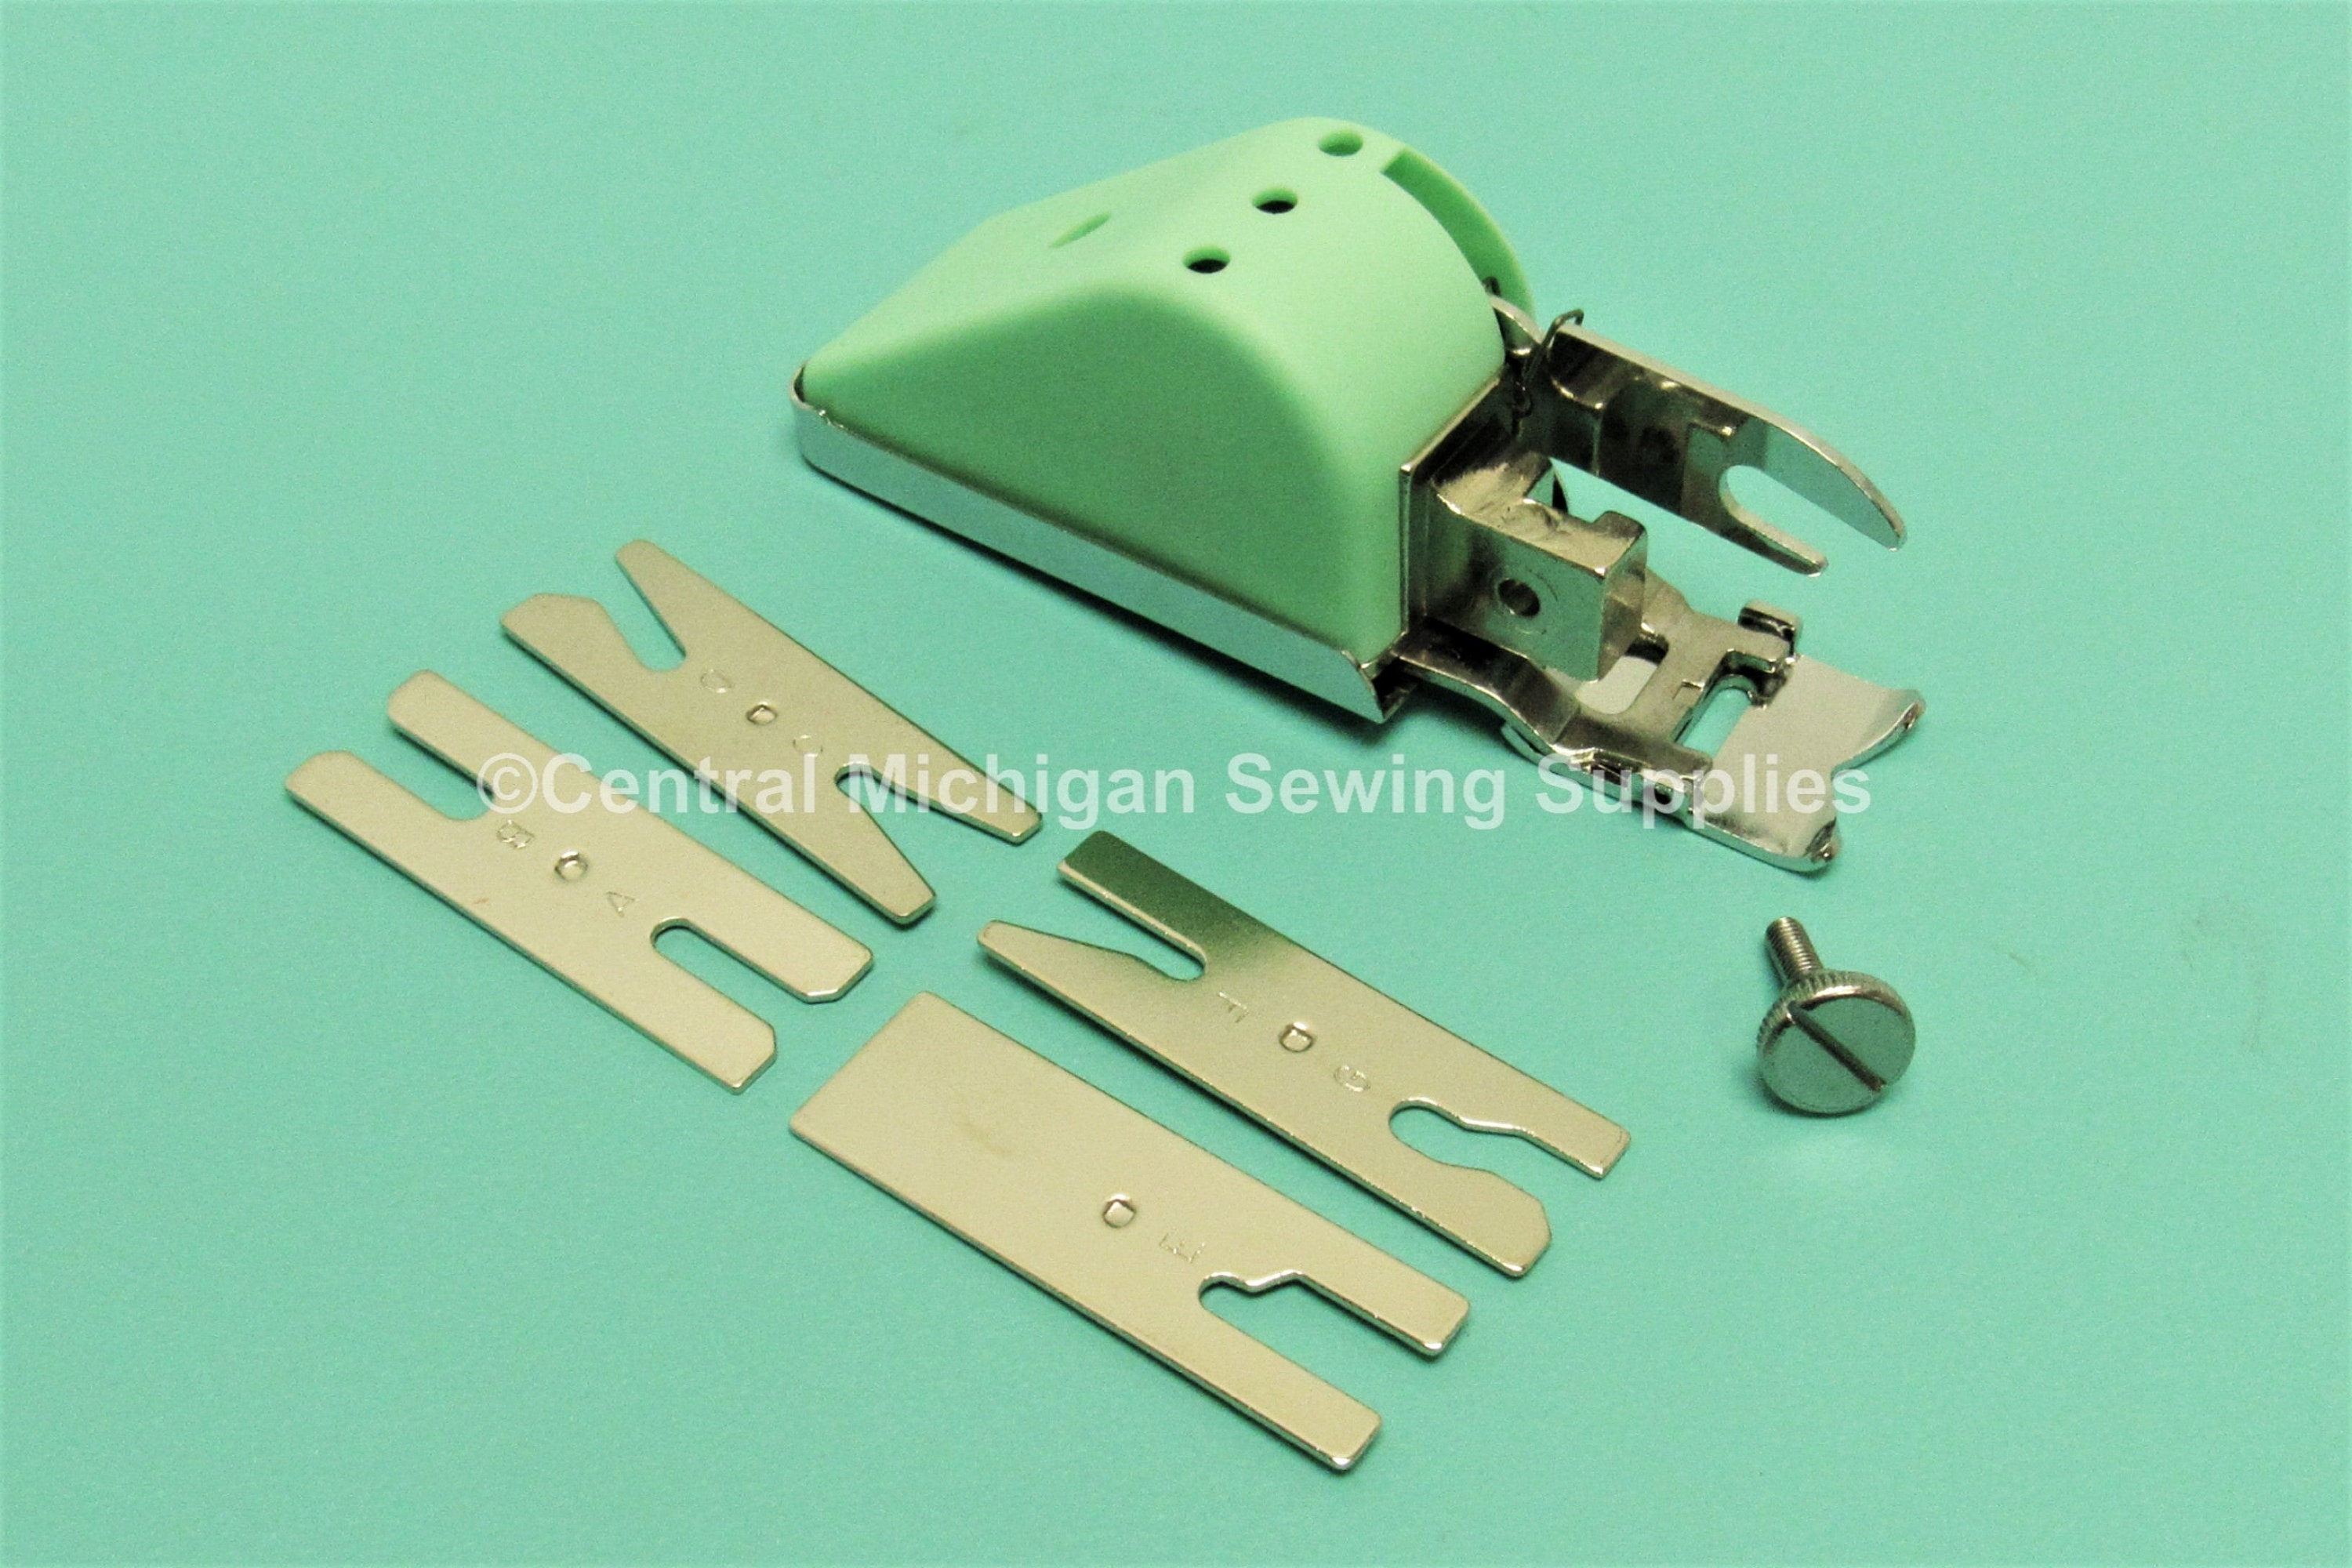 Singer Sewing Machine Lot Of Feet / Attachments For 99k In Green Card Box -  Lot K35